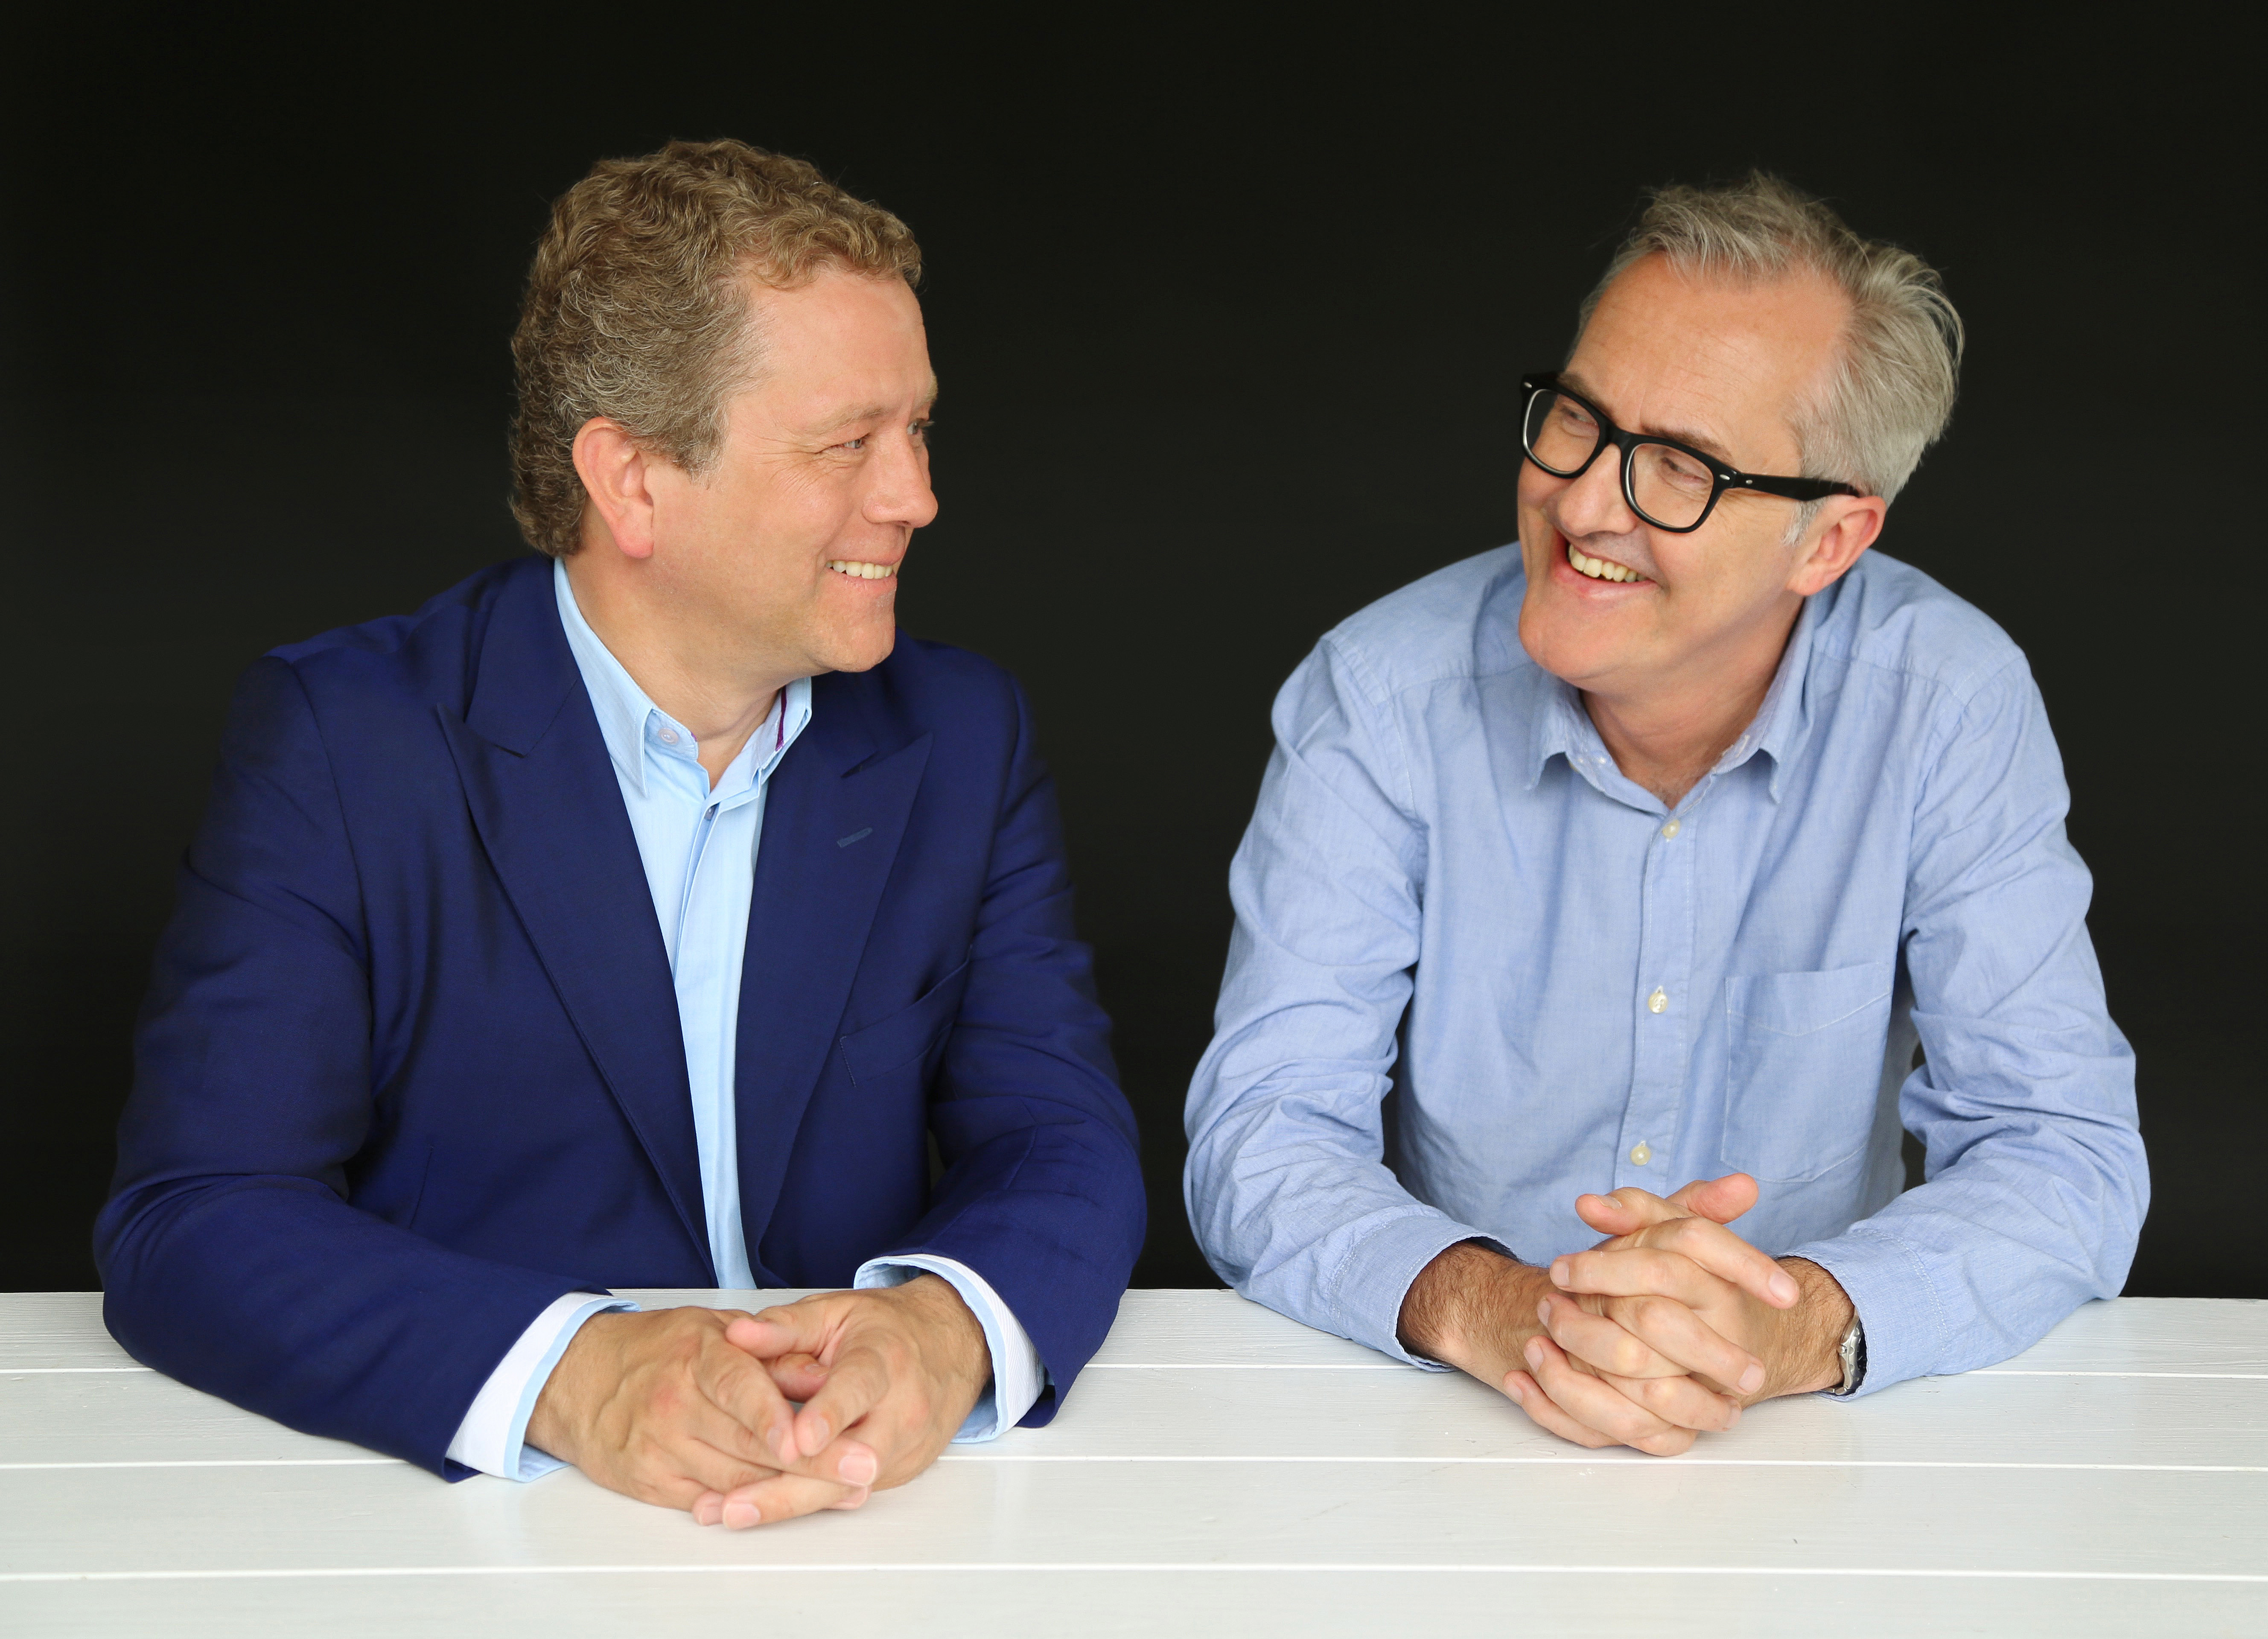 JON CULSHAW ANNOUNCES TOUR WITH AN EVENING OF UNSCRIPTED COMEDY IN THE GREAT BRITISH TAKE OFF